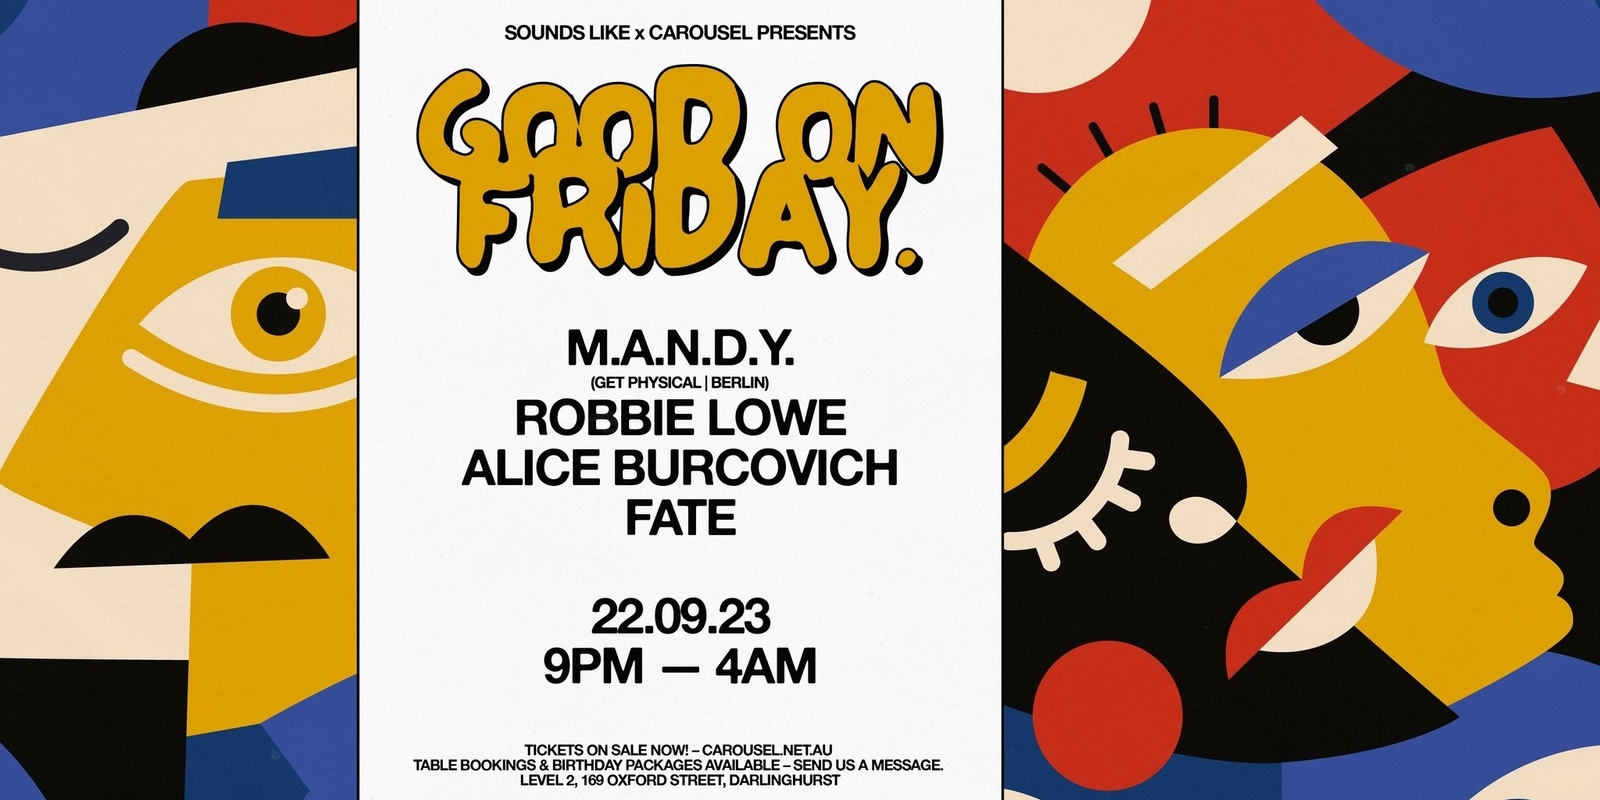 Banner image for SOUNDS LIKE X CAROUSEL PRESENT GOOD ON FRIDAY FT M.A.N.D.Y.